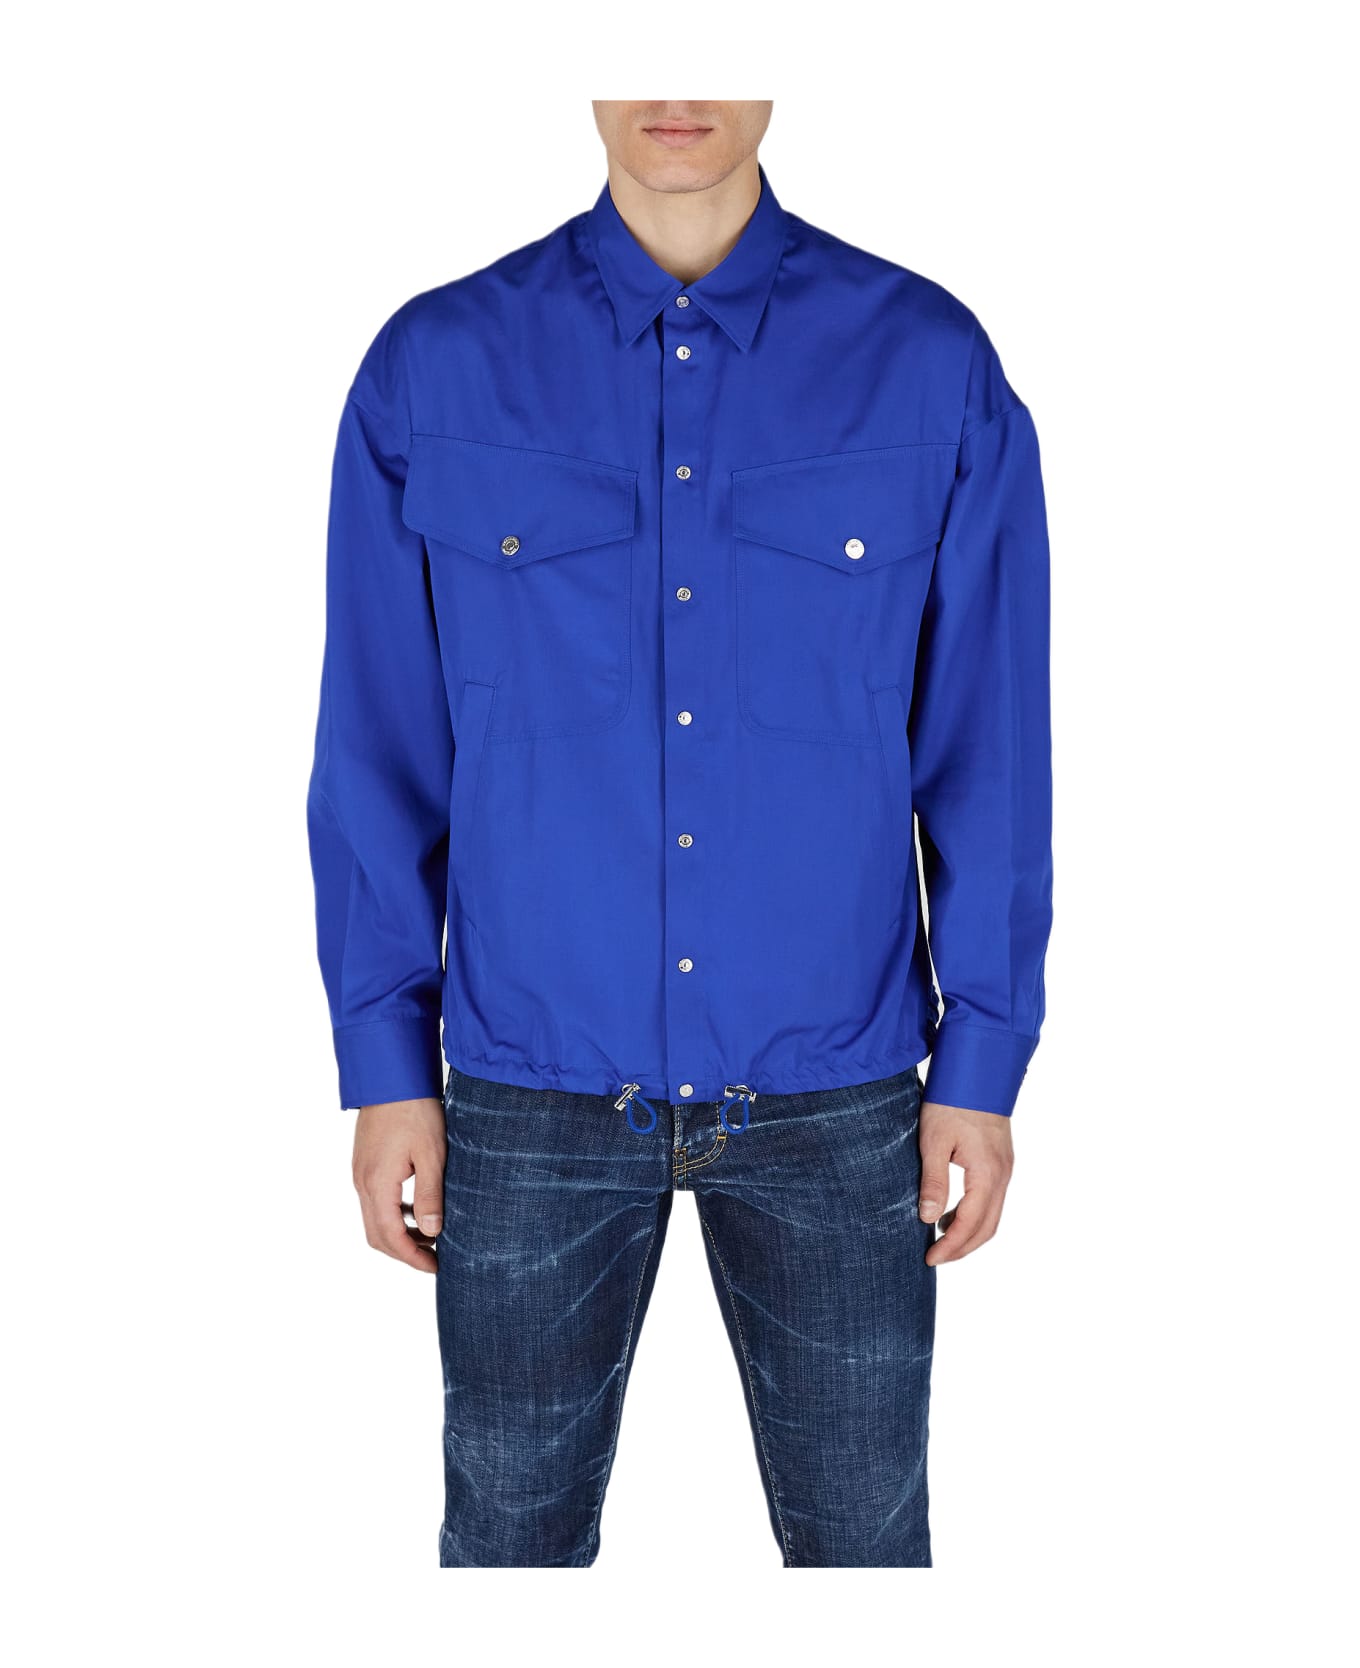 Dsquared2 Shirts - Ink blue シャツ